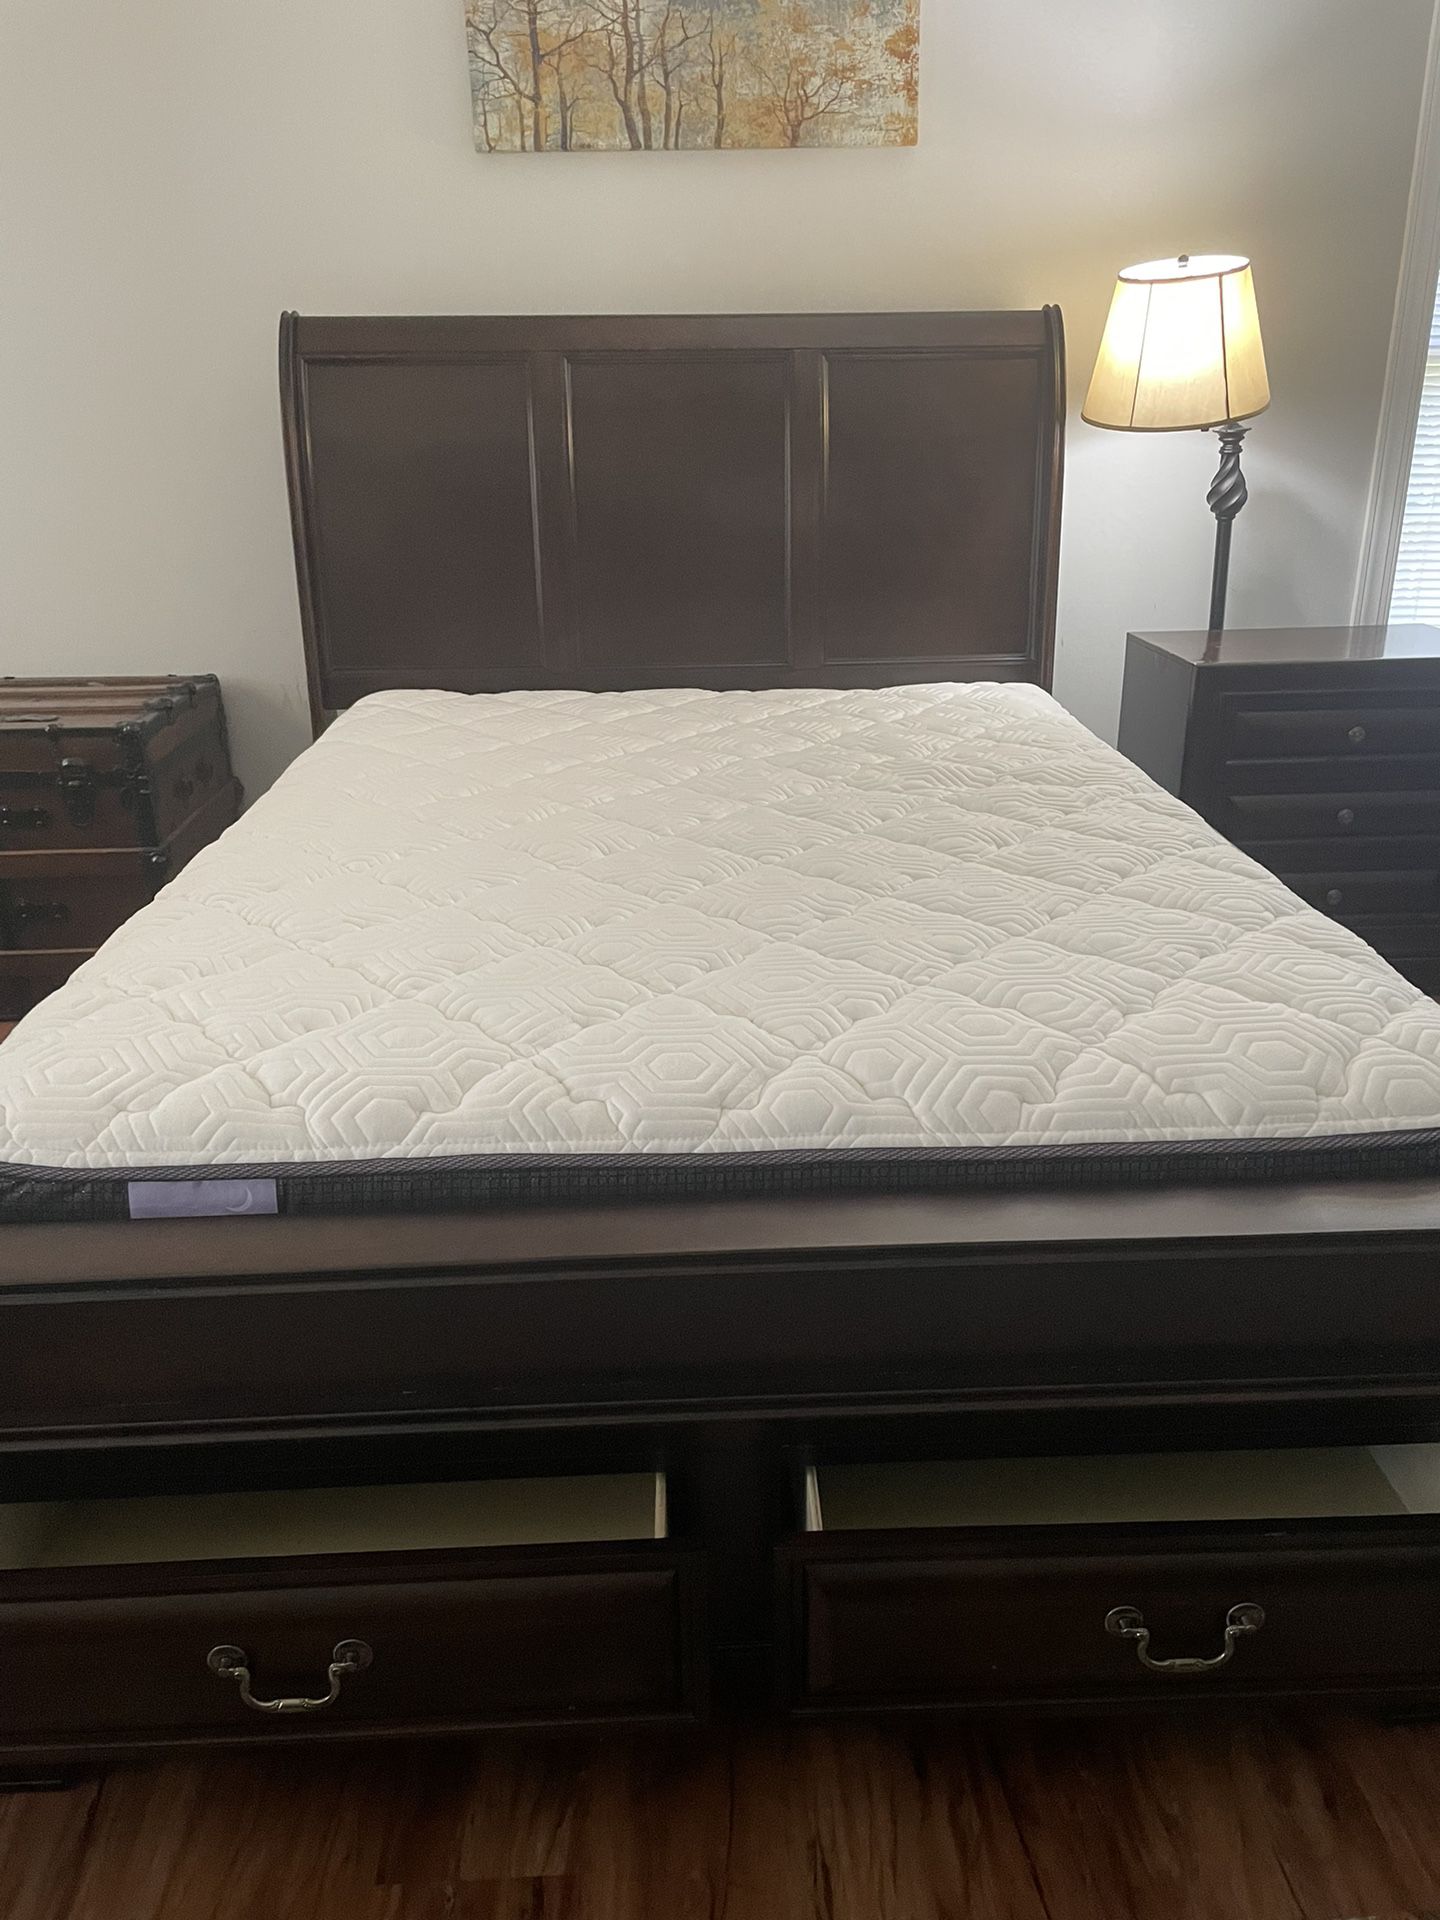 Bedroom Set,Queen Size Bed With Quality Mattress,One Dresser With Mirror.